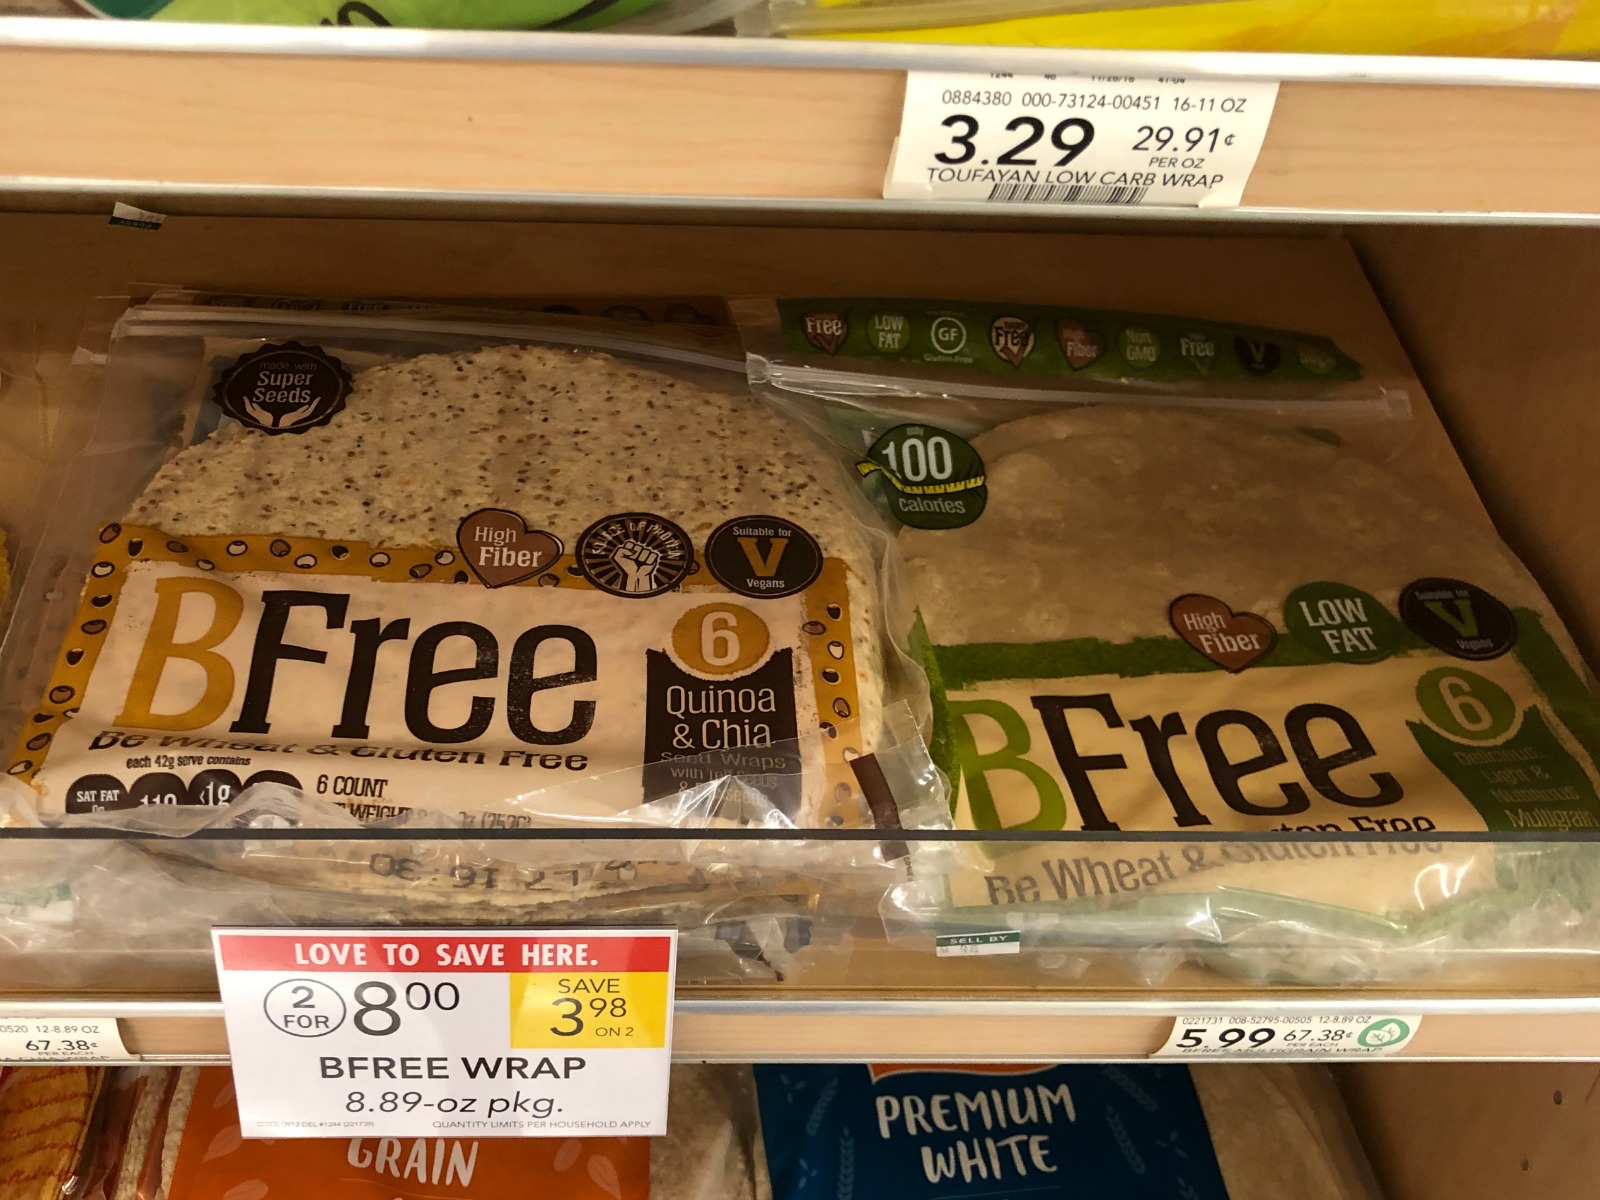 Save On BFree Wraps At Publix + Enter To Win A Back To School Prize Pack (Includes $50 Publix Gift Card - 3 Winners!) on I Heart Publix